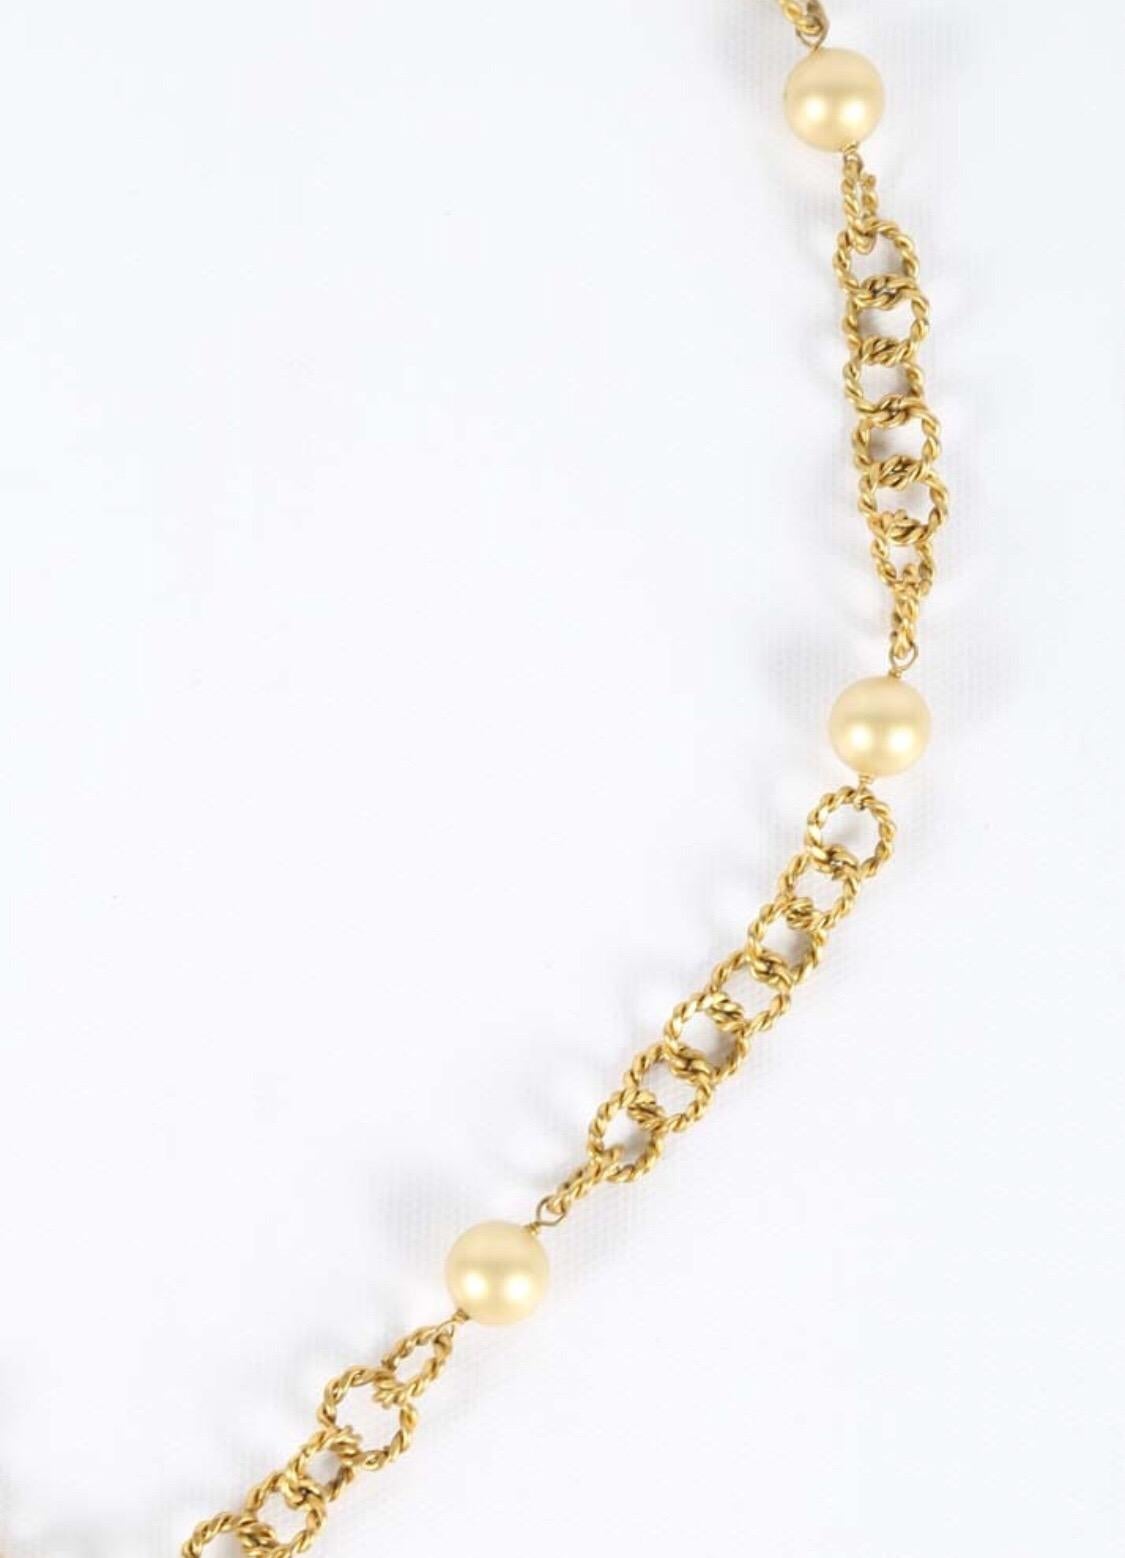 Chanel Gripoix Pendent Necklace with Pearls, 1980s 3